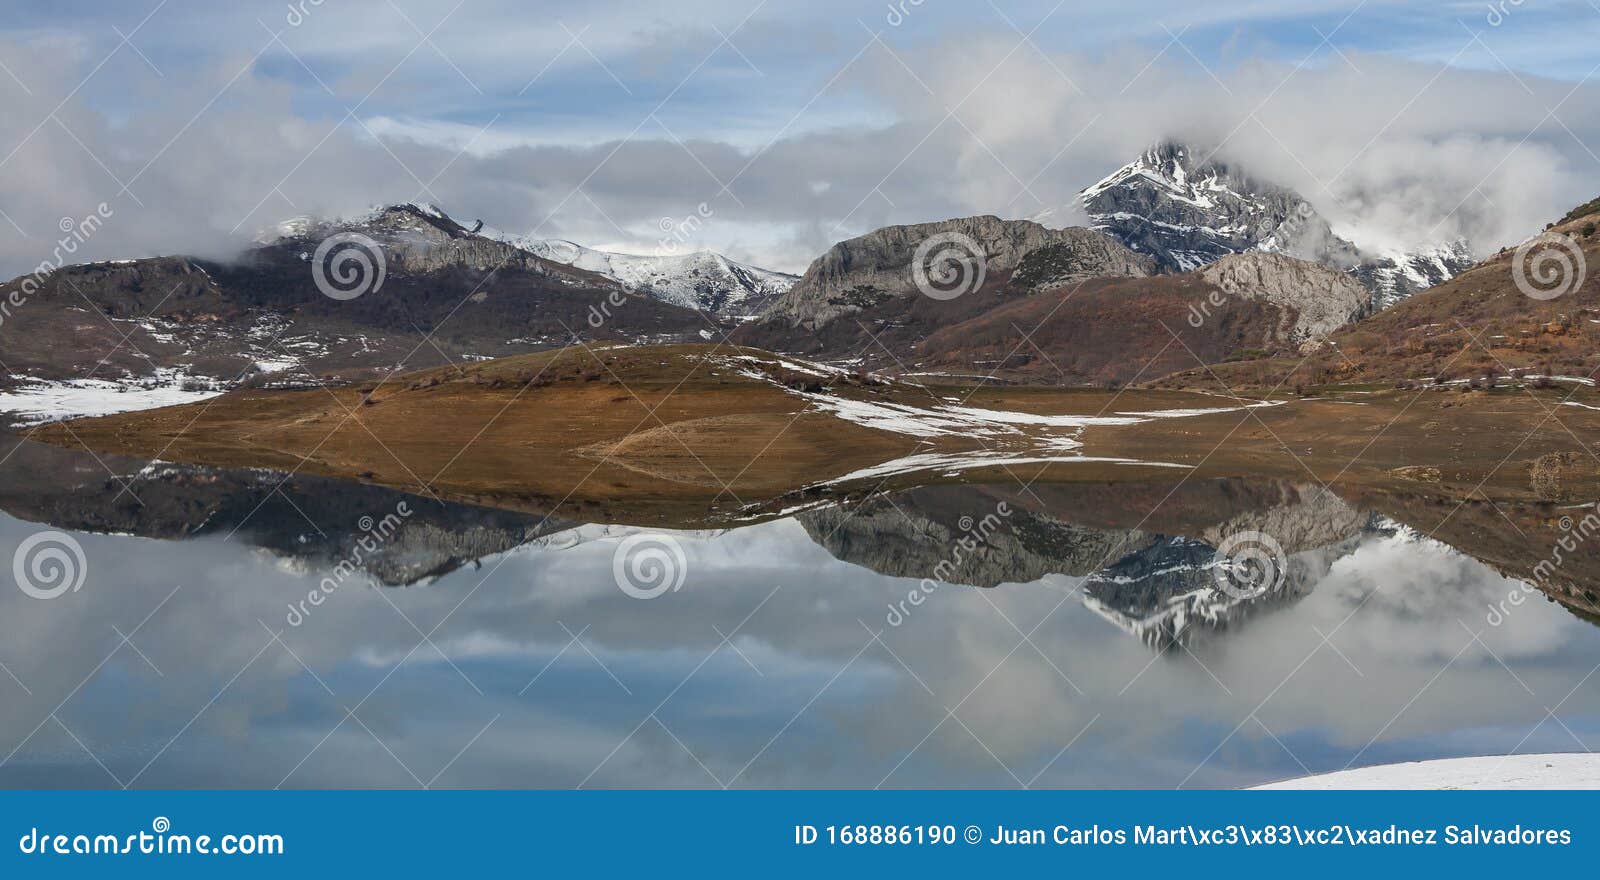 porma reservoir, susaron peak snowy and its reflection in the water. lion. spain